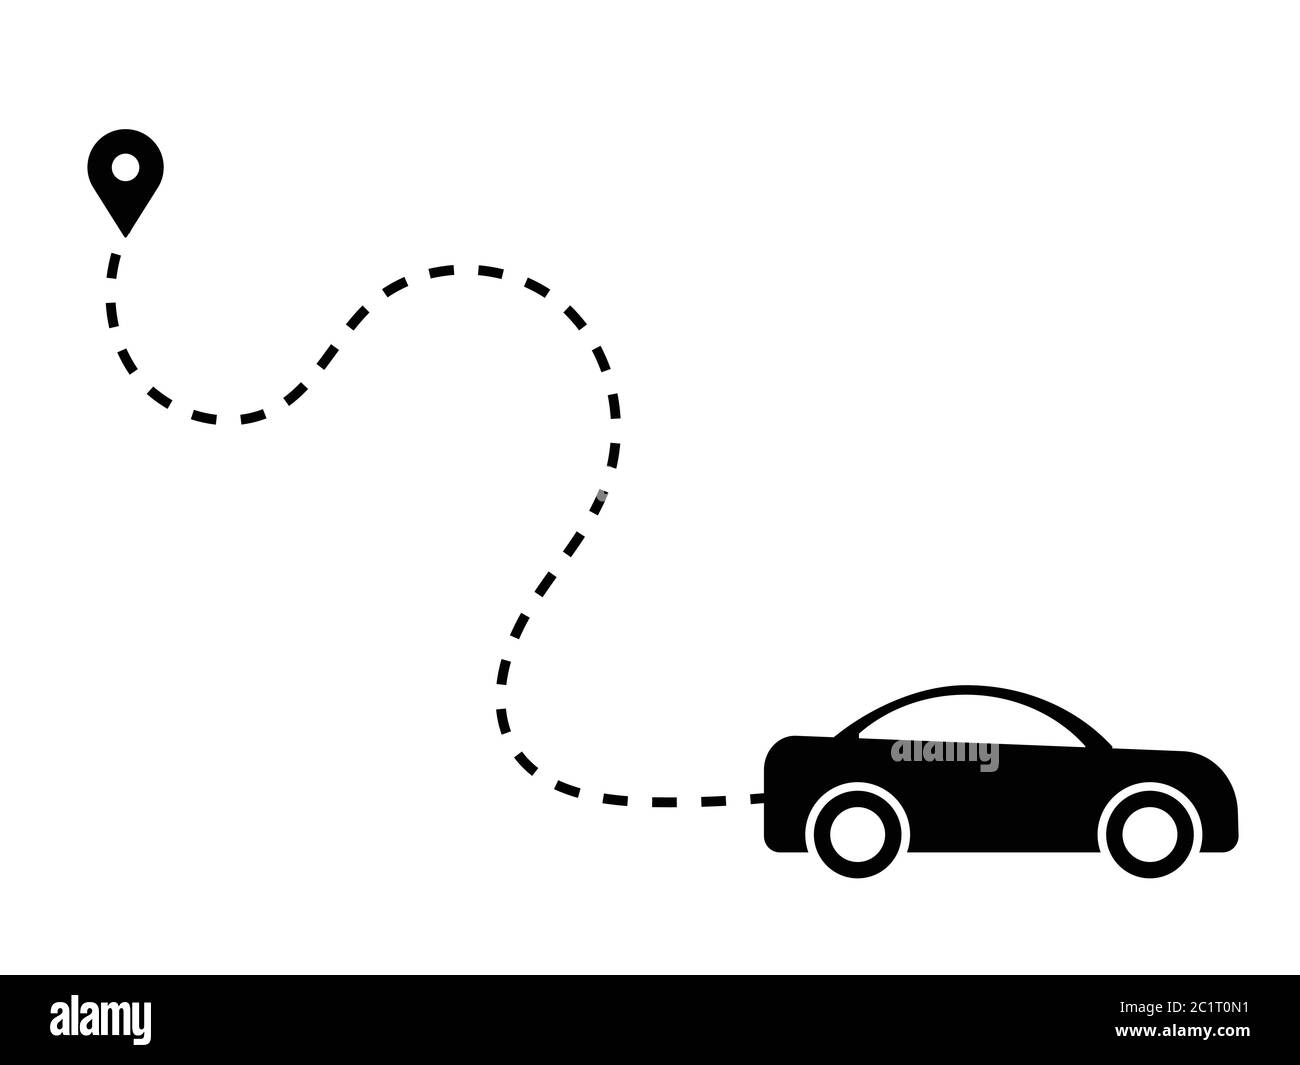 Car Dotted Path Line Driving Away From Destination Journey Trip. Black Illustration Isolated on a White Background. EPS Vector Stock Vector